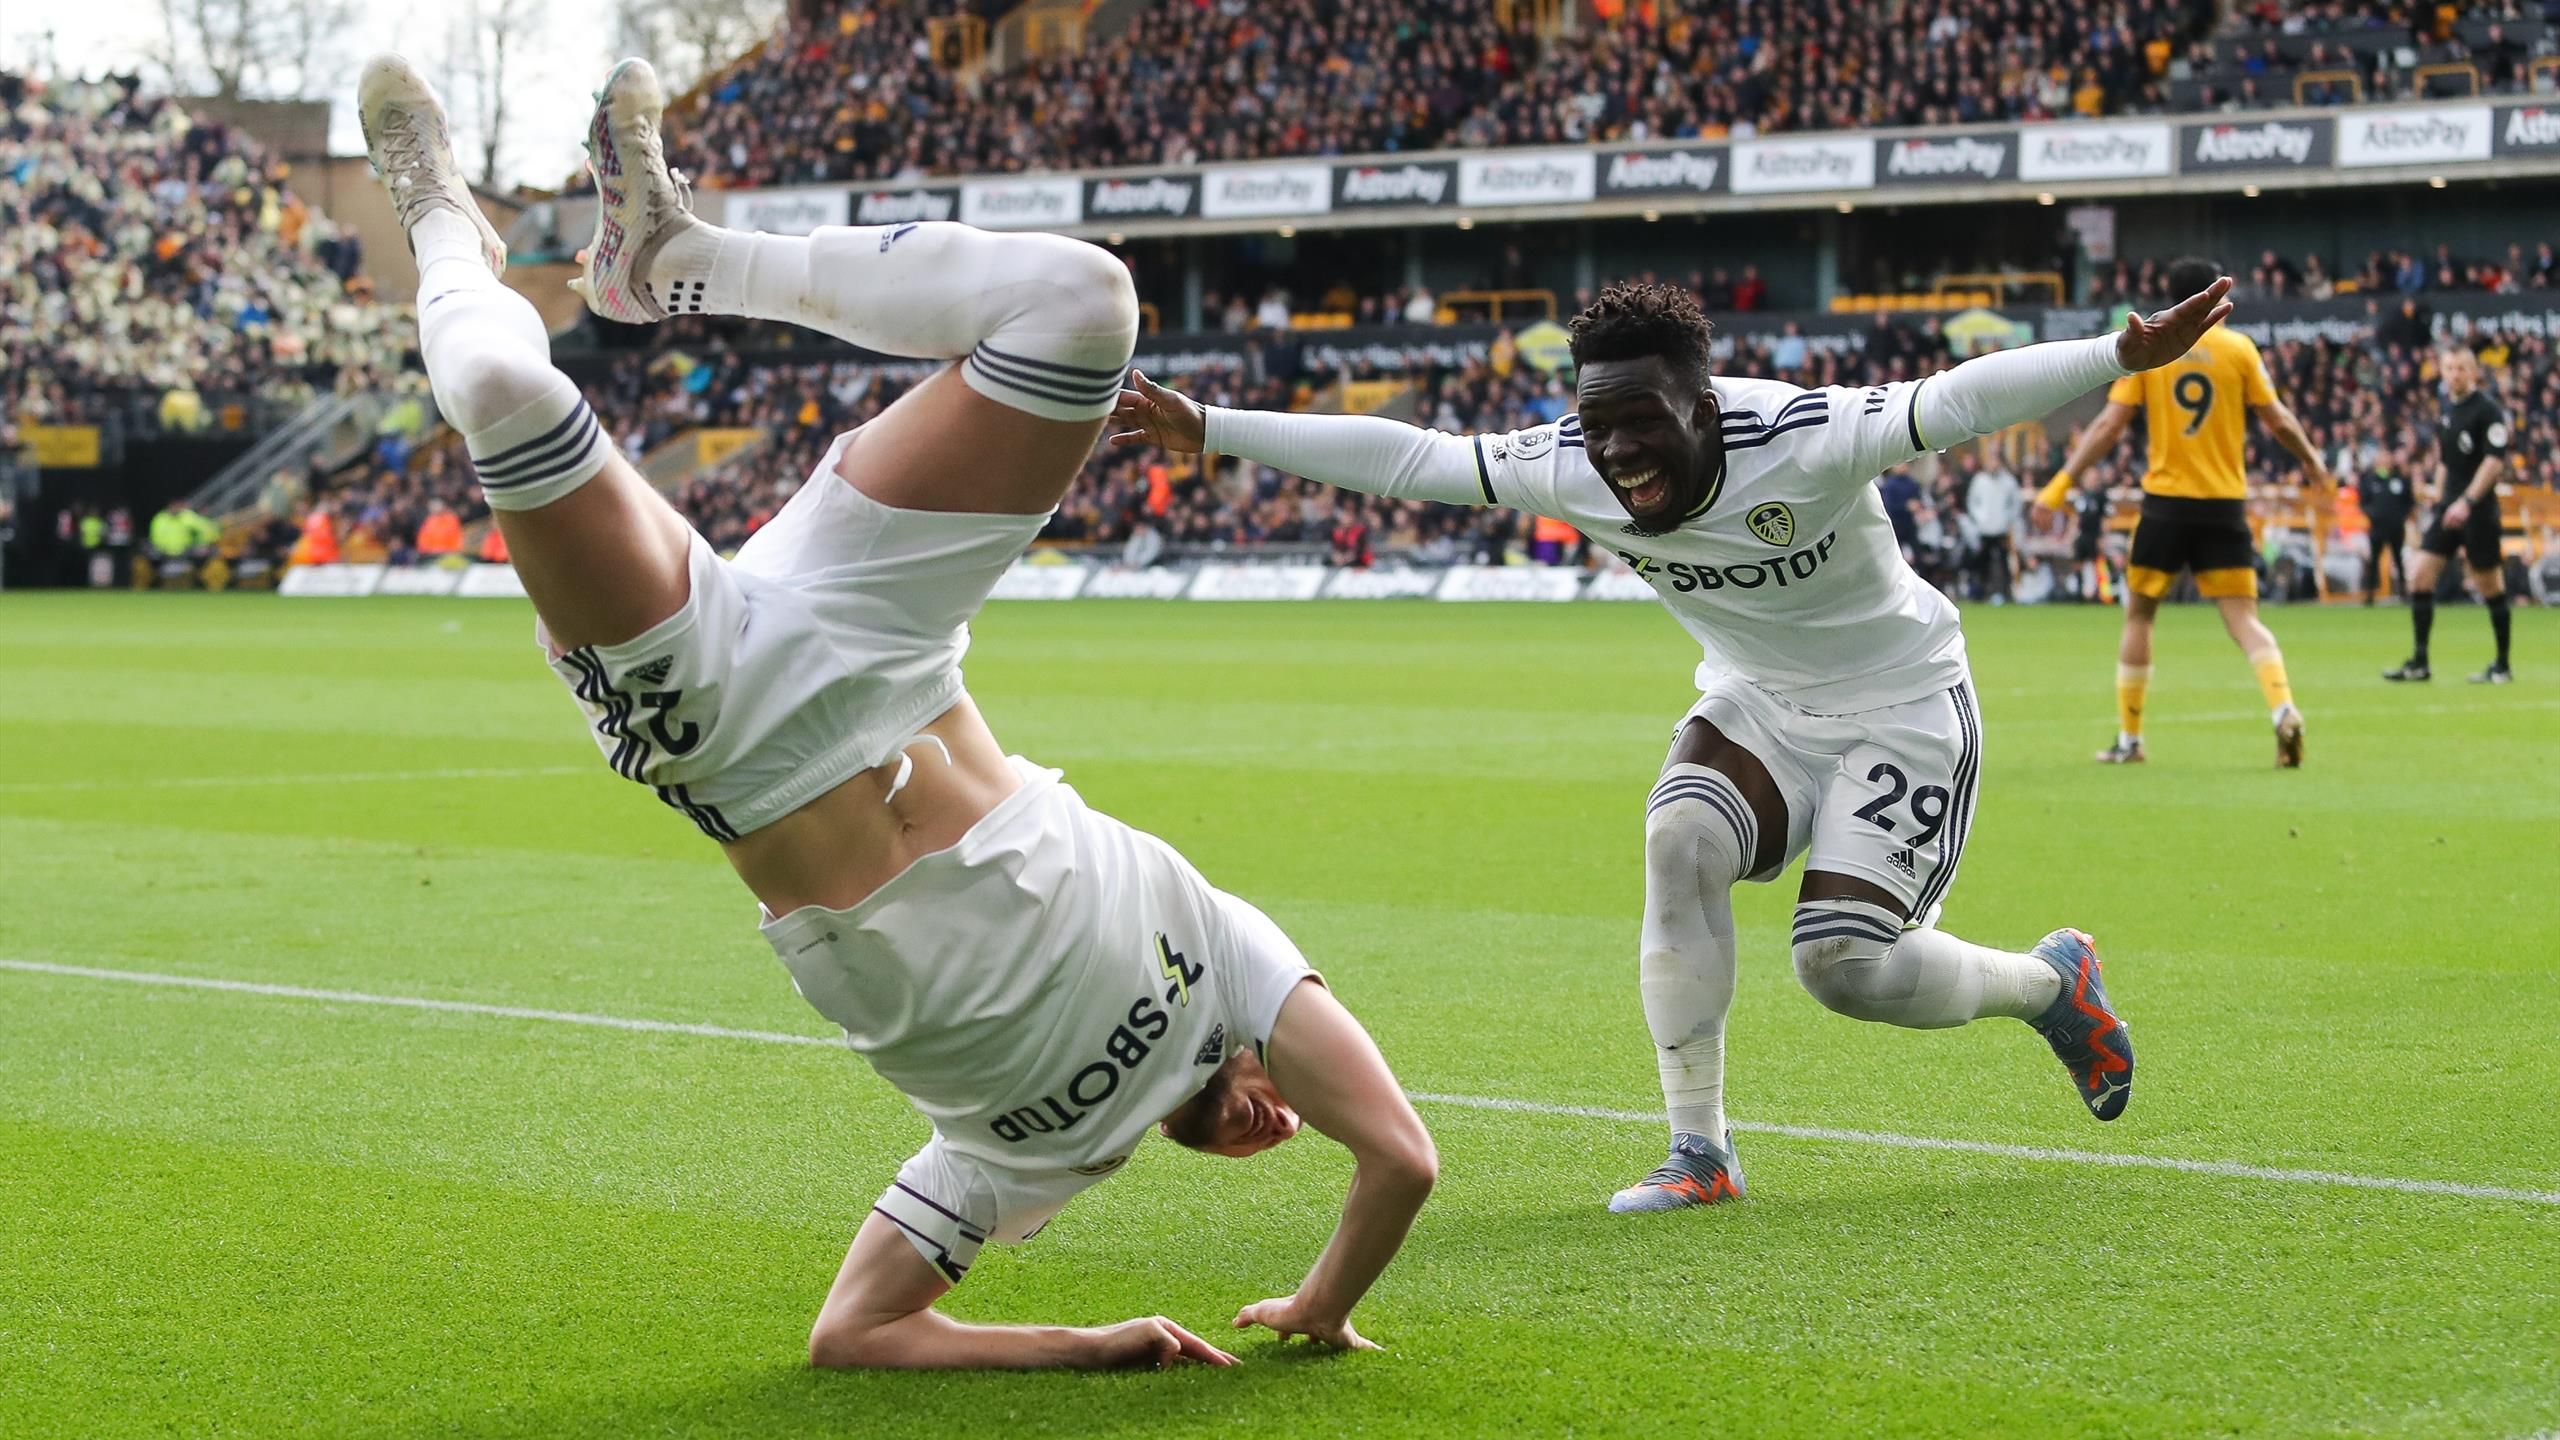 Leeds United take big Premier League win in thriller at Wolves, Brentford and Leicester draw, Villa win